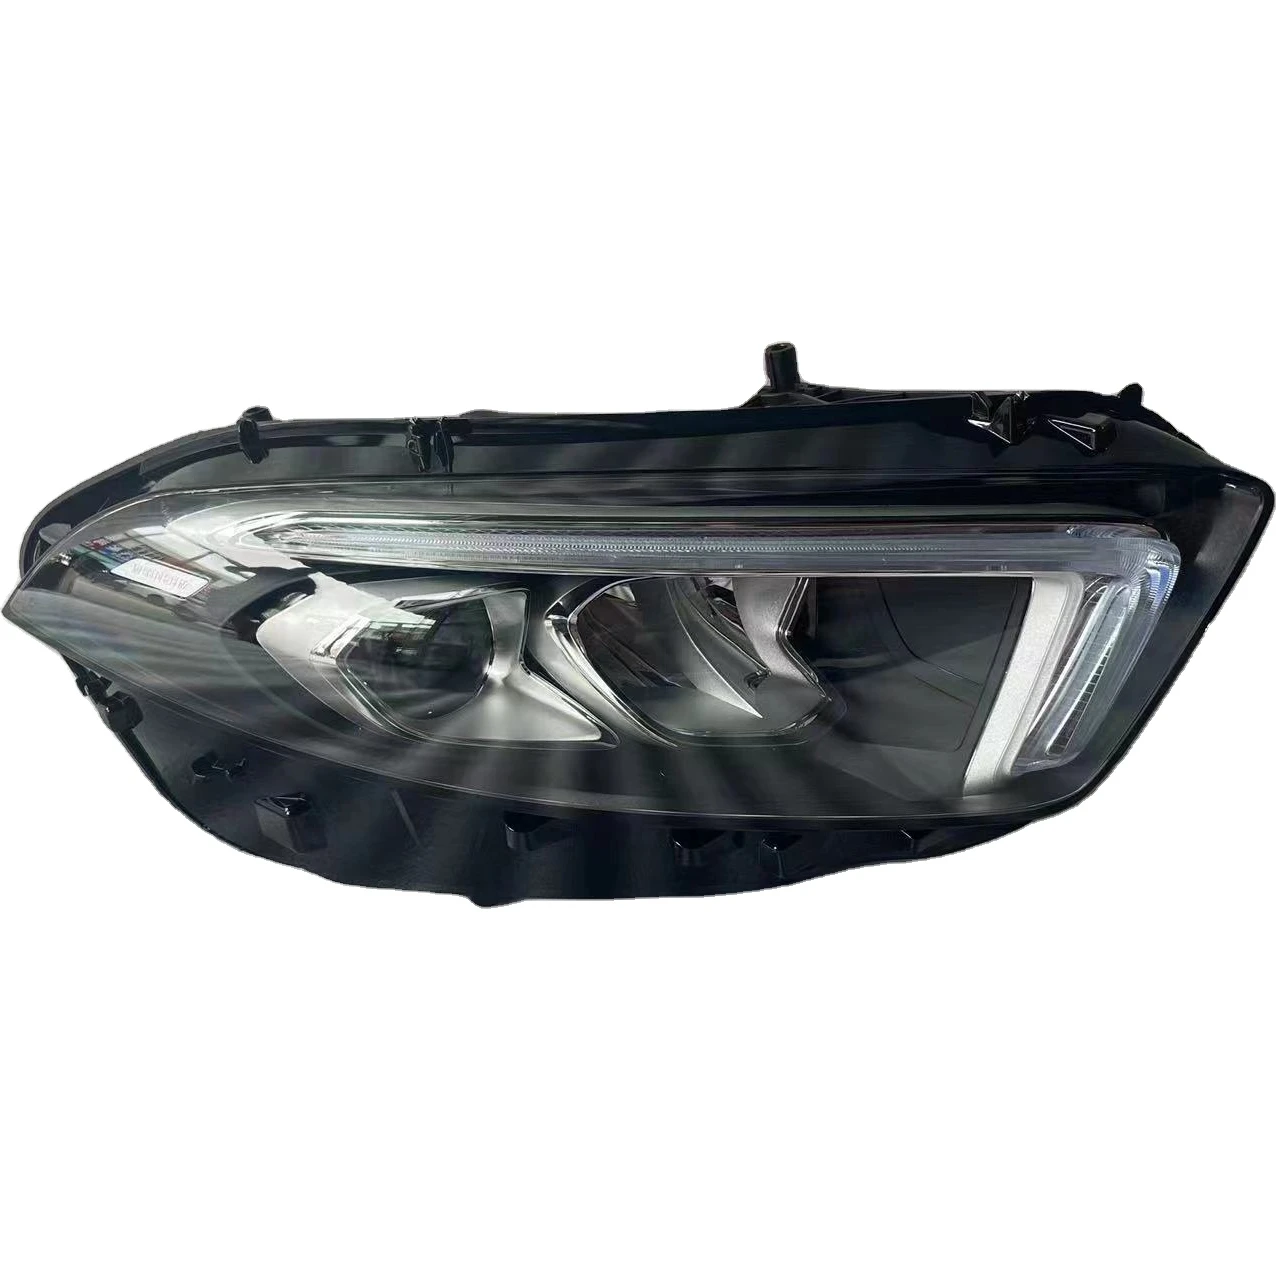 

19-22 new FOR M-Bz A-Class W177 Headlight assembly Single lens double high-powered LED automotive lighting system